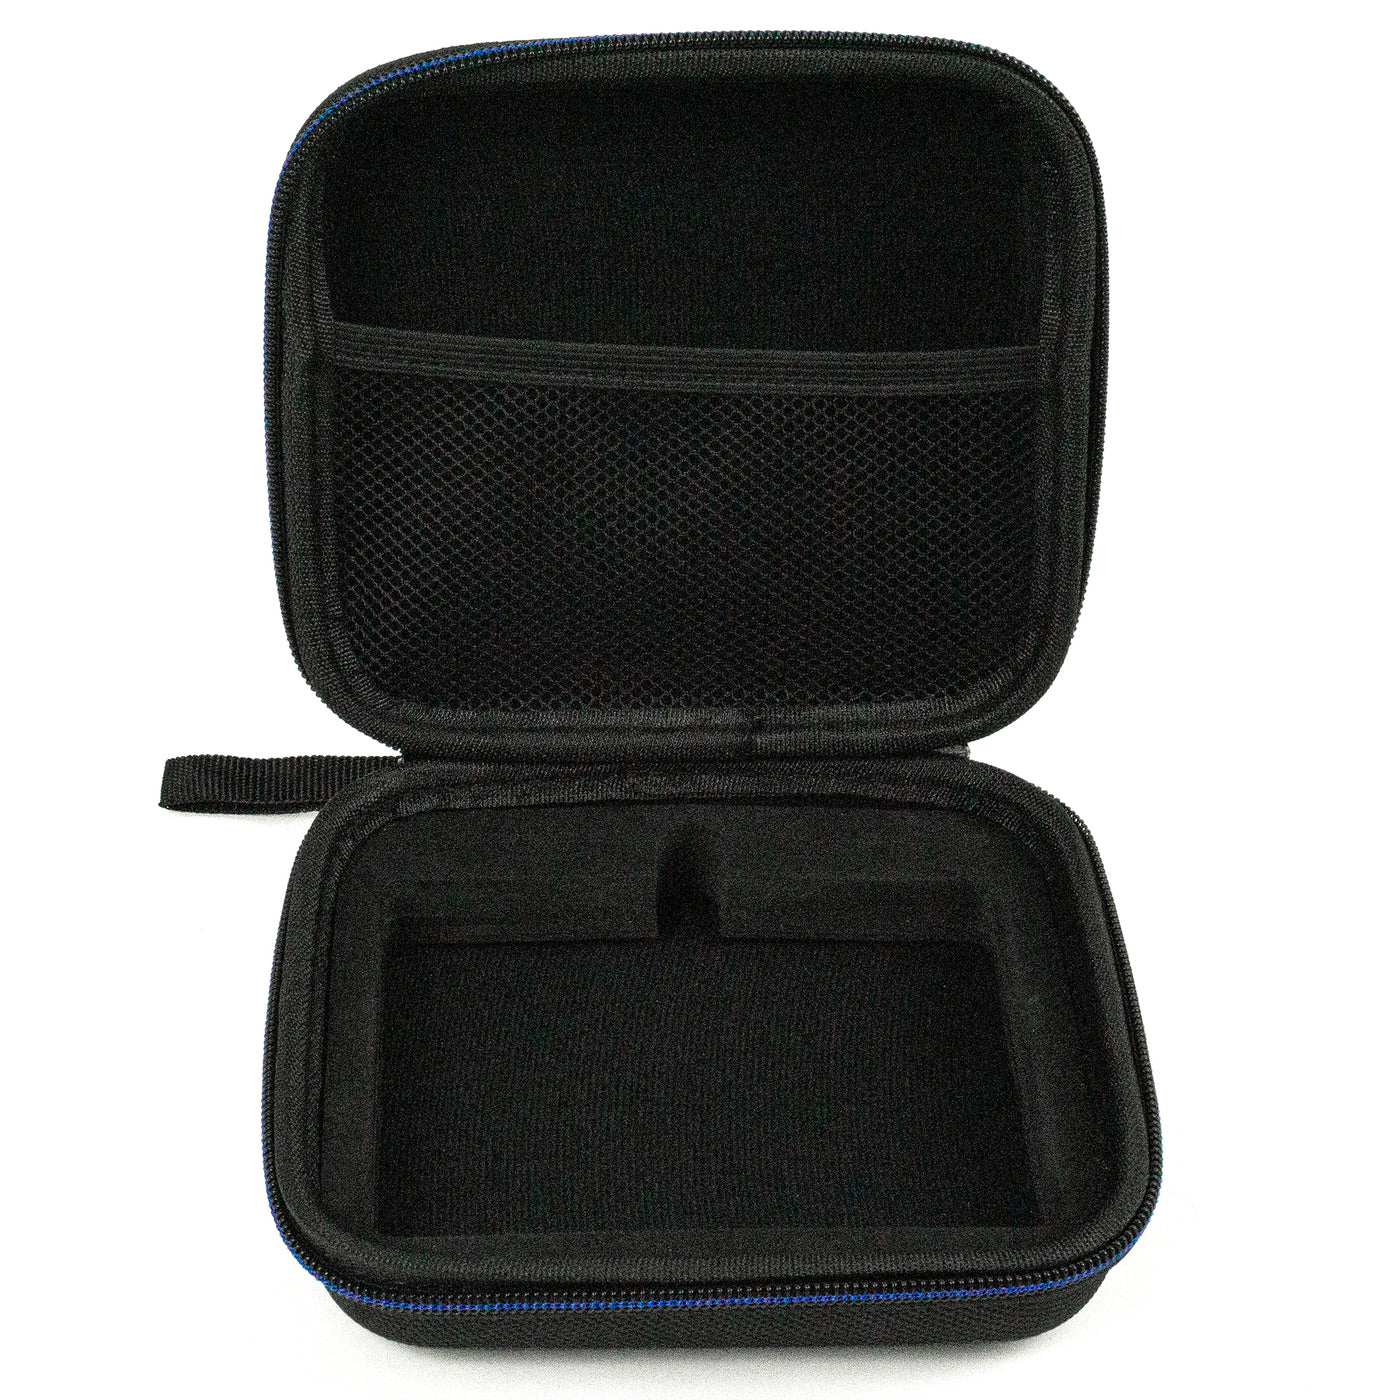 Hardshell Carrying Case for STOMP Foot Controller